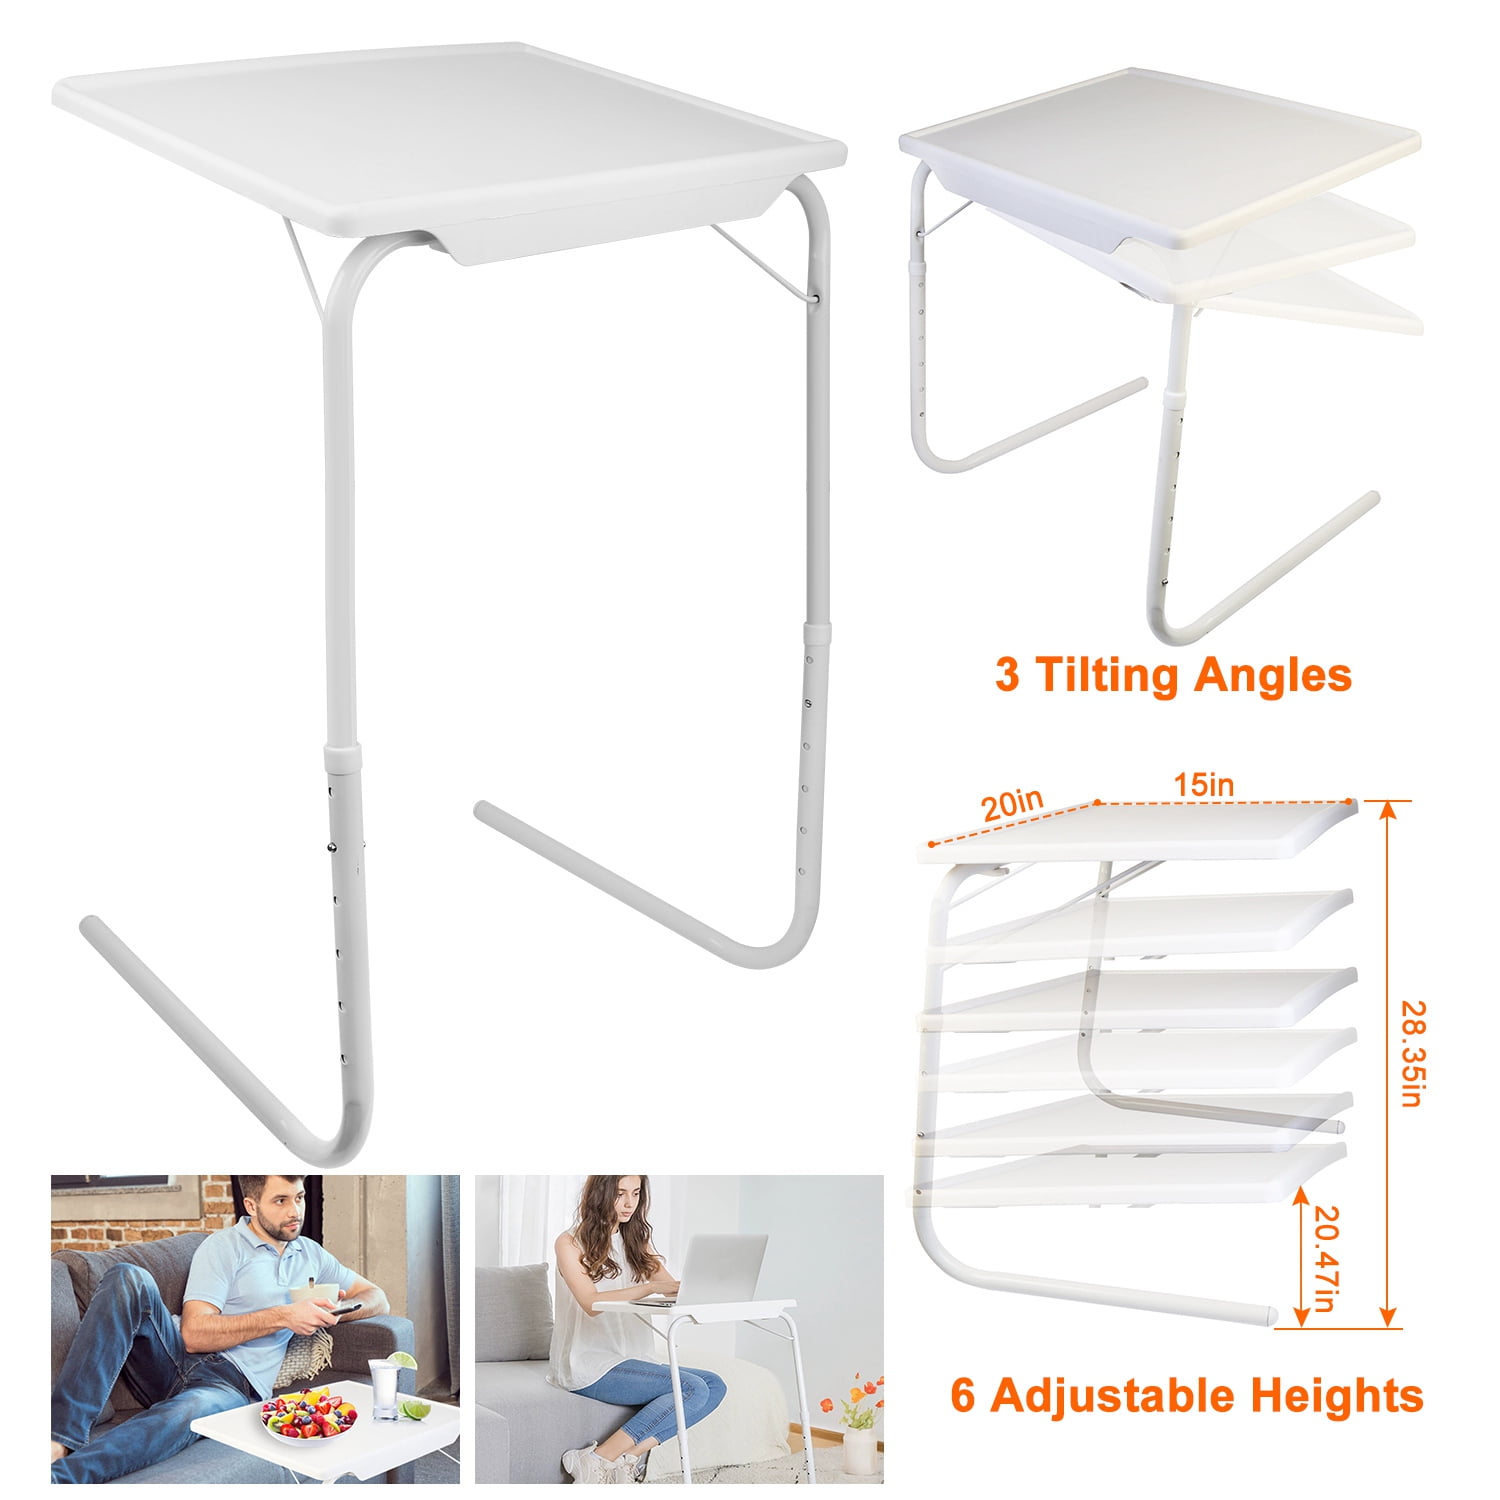 Tilt-a-Table Portable Height Adjustable TV Tray/Laptop Table, White